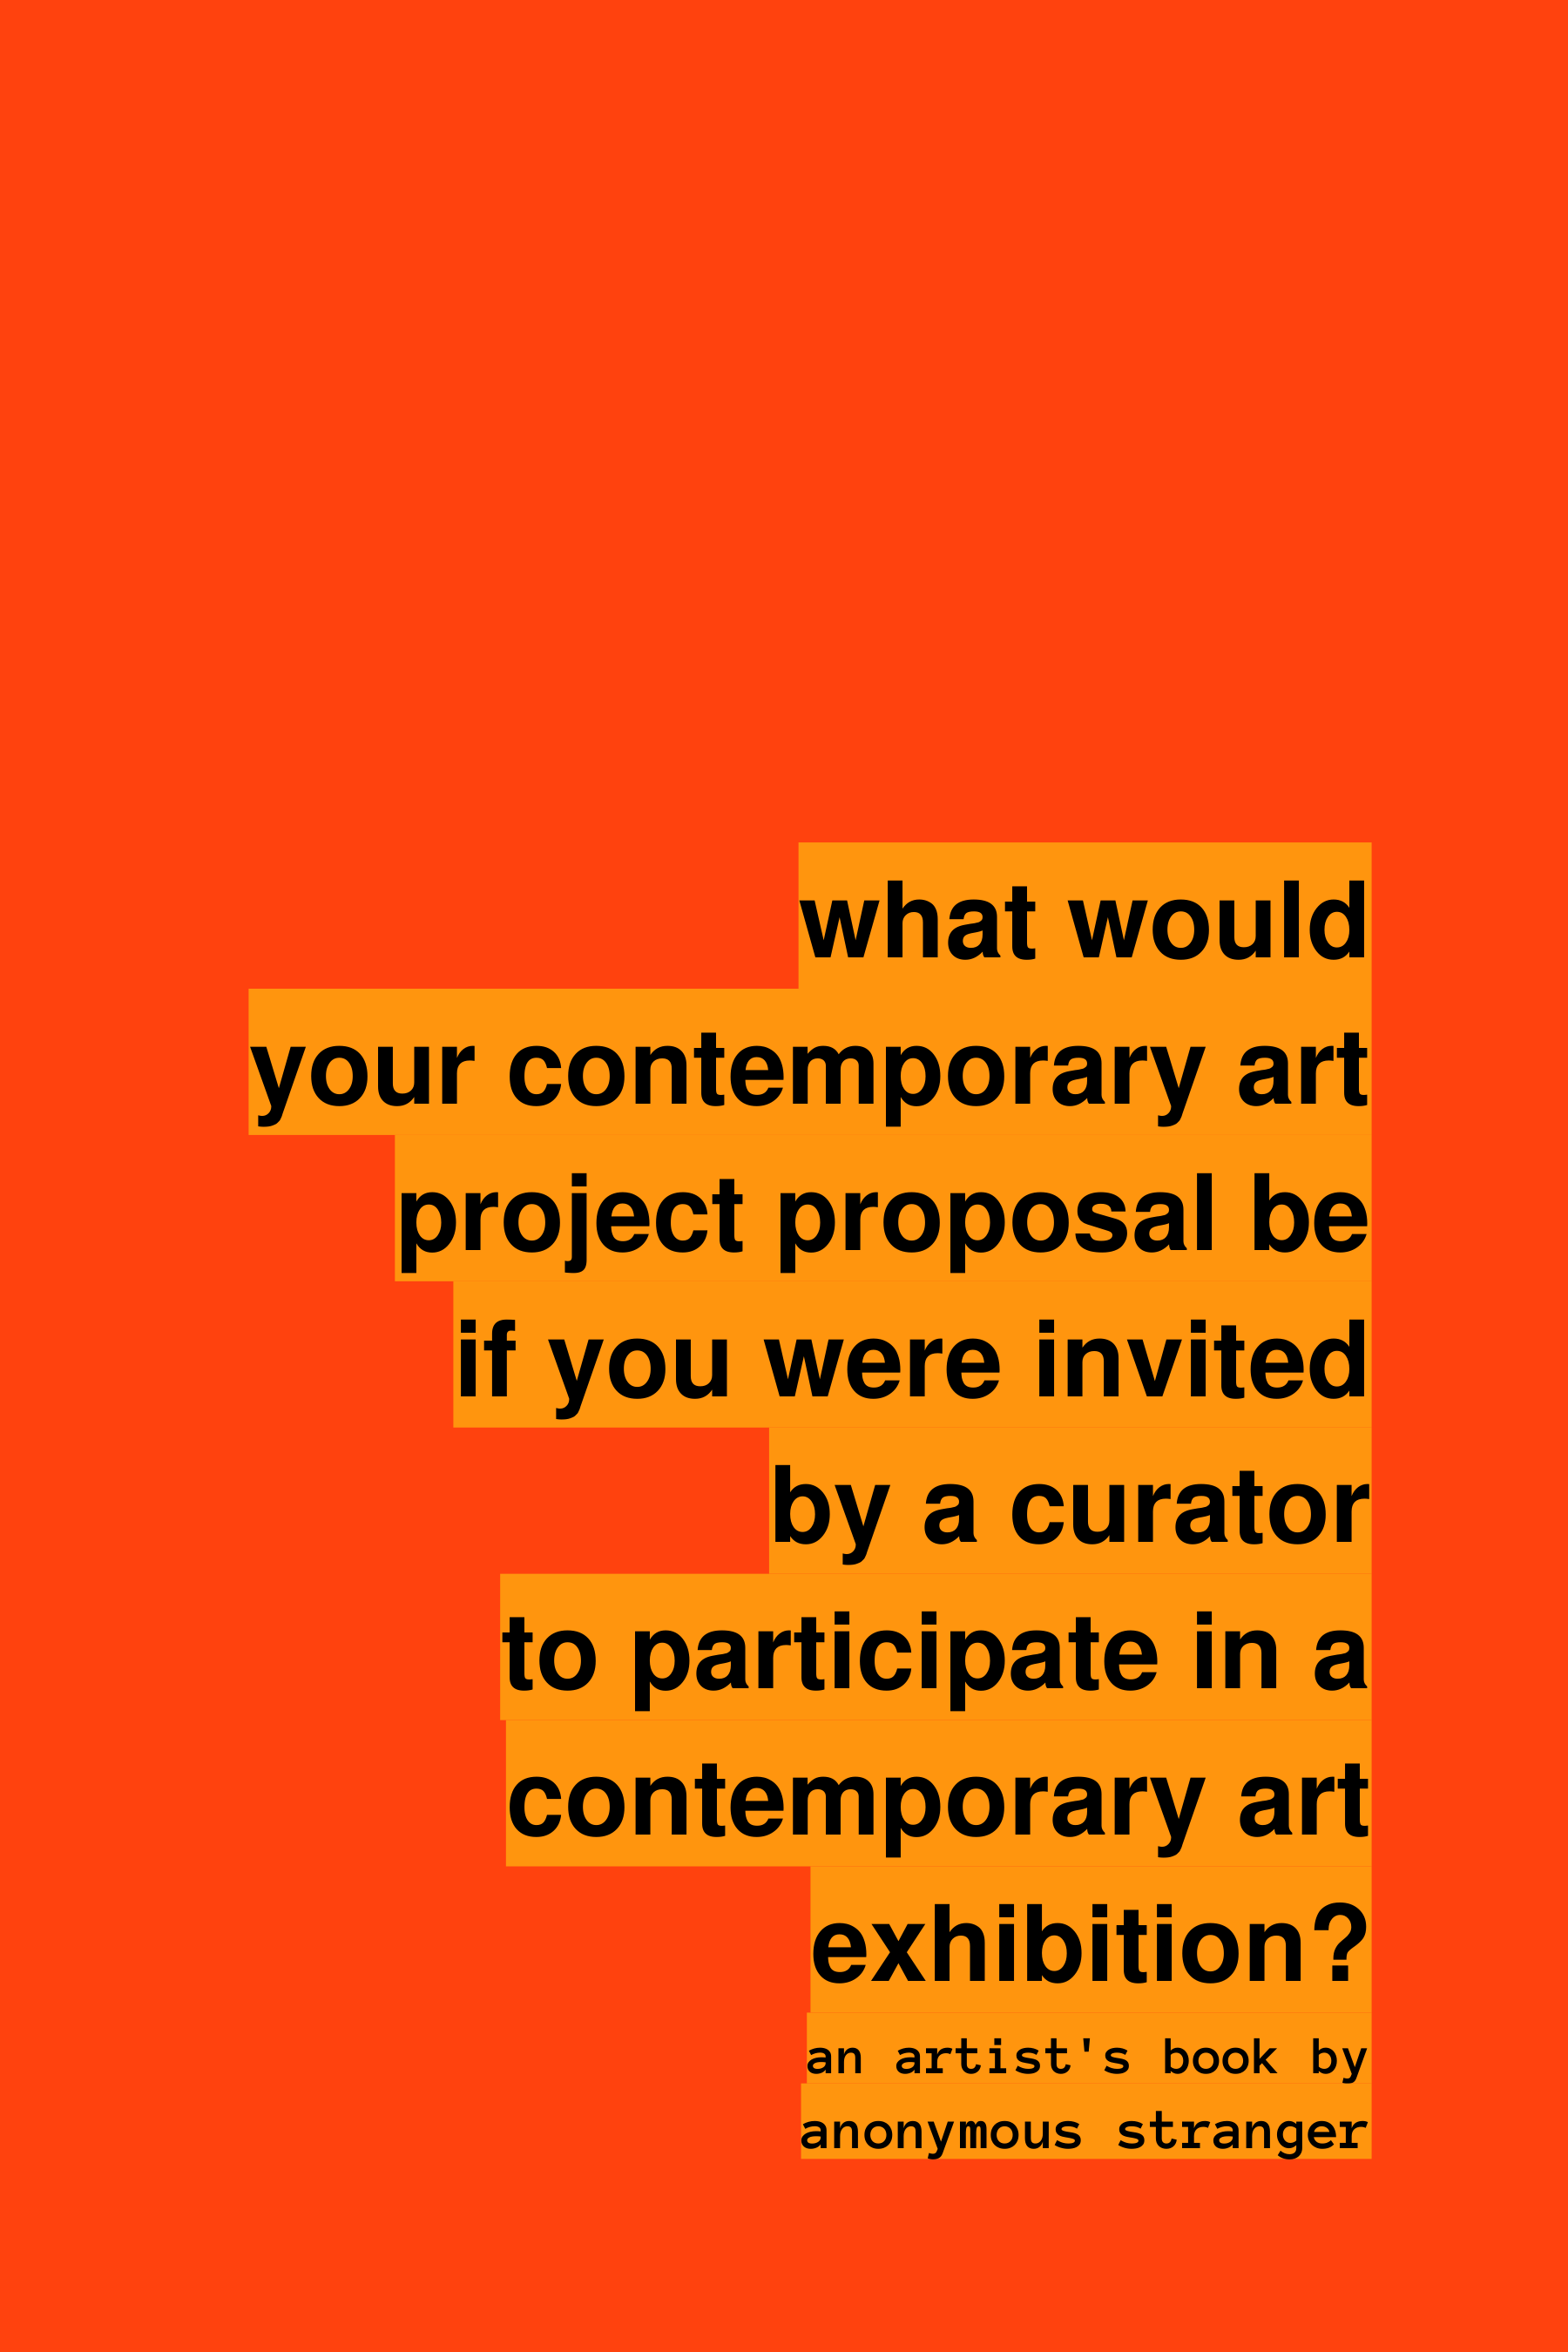 what would your contemporary art project proposal be if you were  invited by a curator to participate in a contemporary art exhibition?_front cover